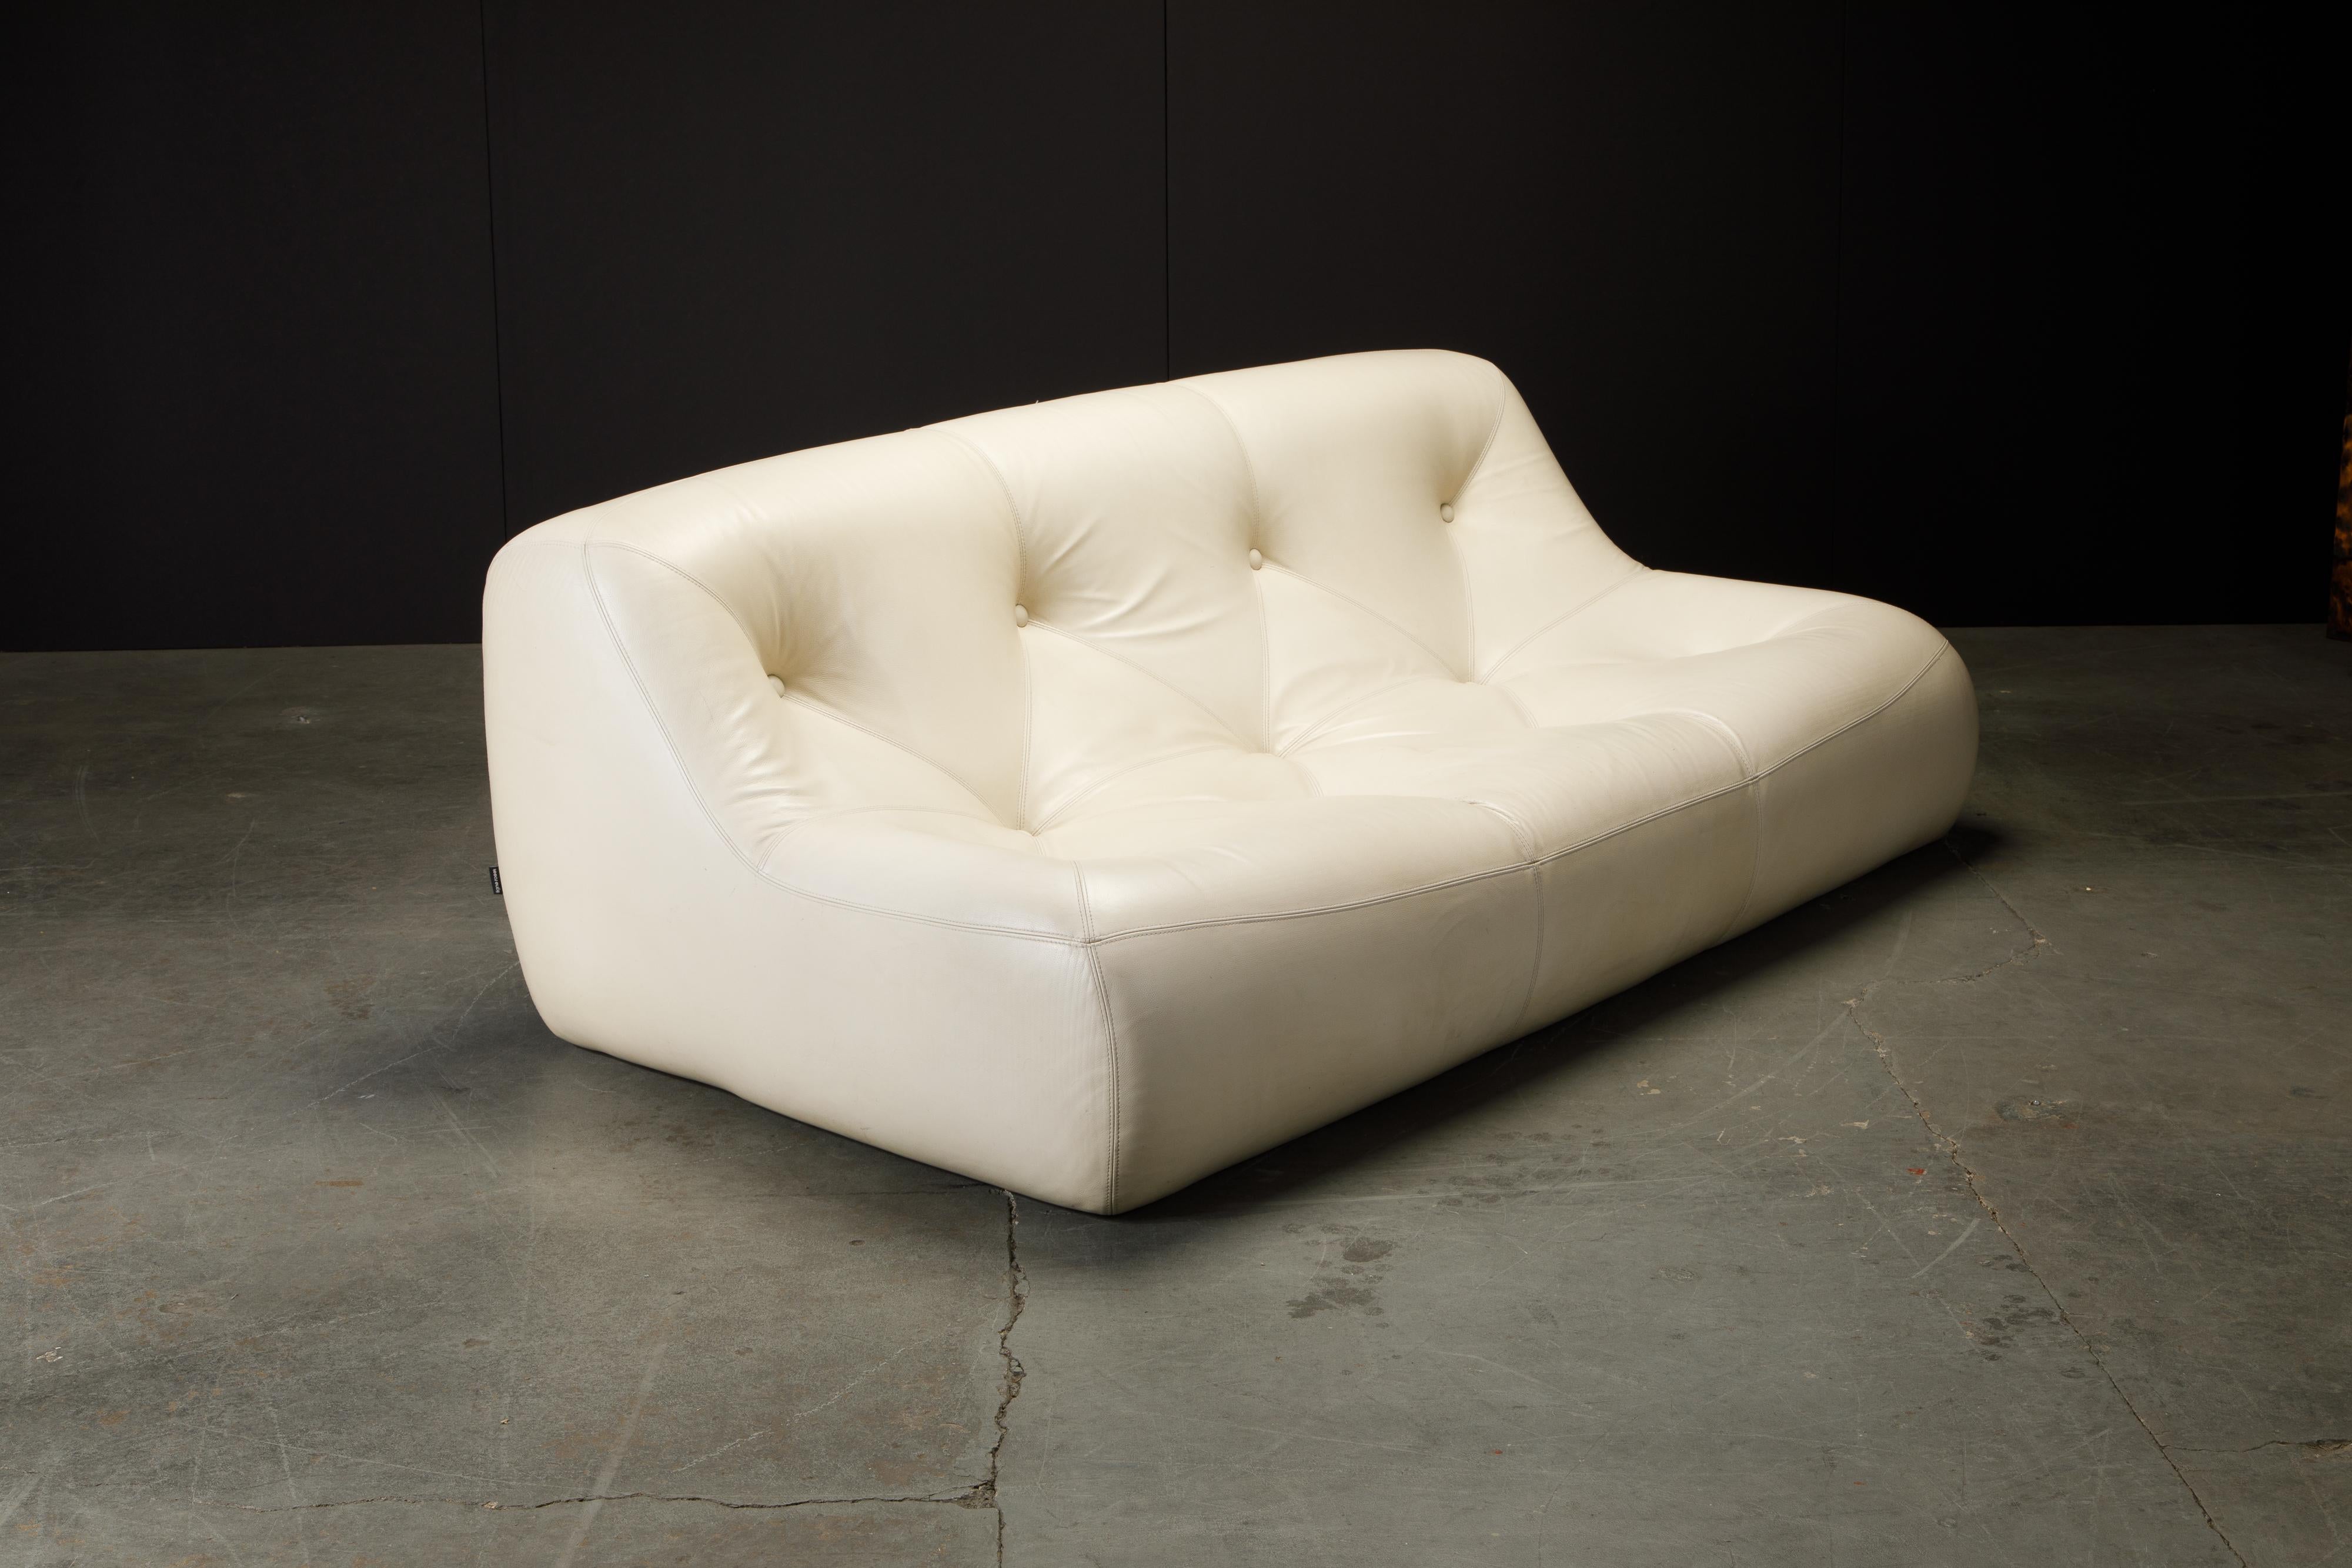 Late 20th Century 'Kali' Leather Sofa by Michel Ducaroy for Ligne Roset, c. 1995, Signed